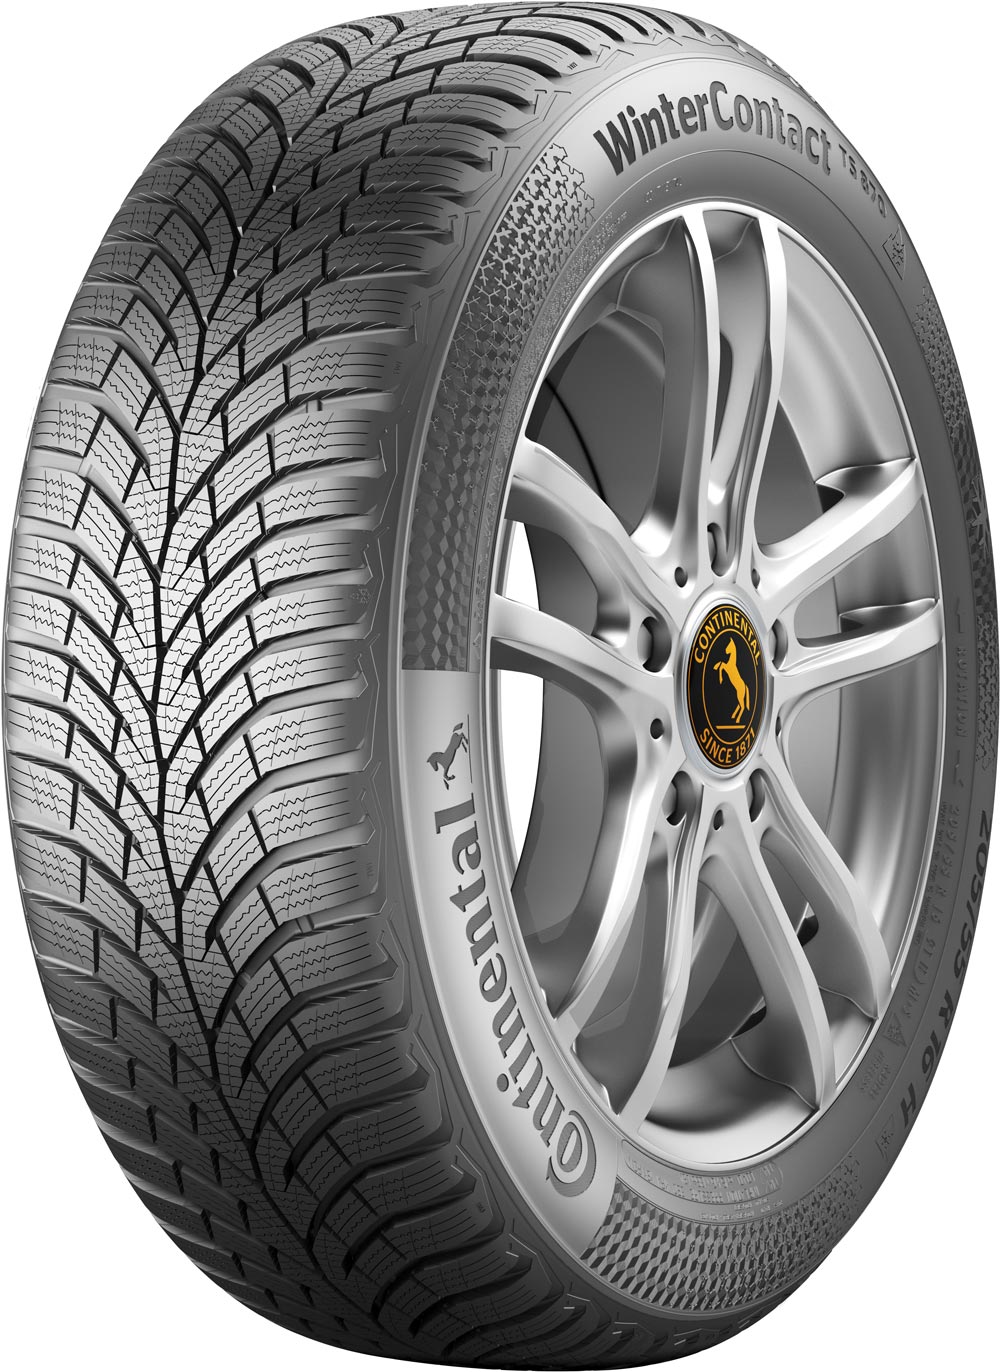 Anvelope auto CONTINENTAL WinterContact TS 870 XL 225/50 R17 98H